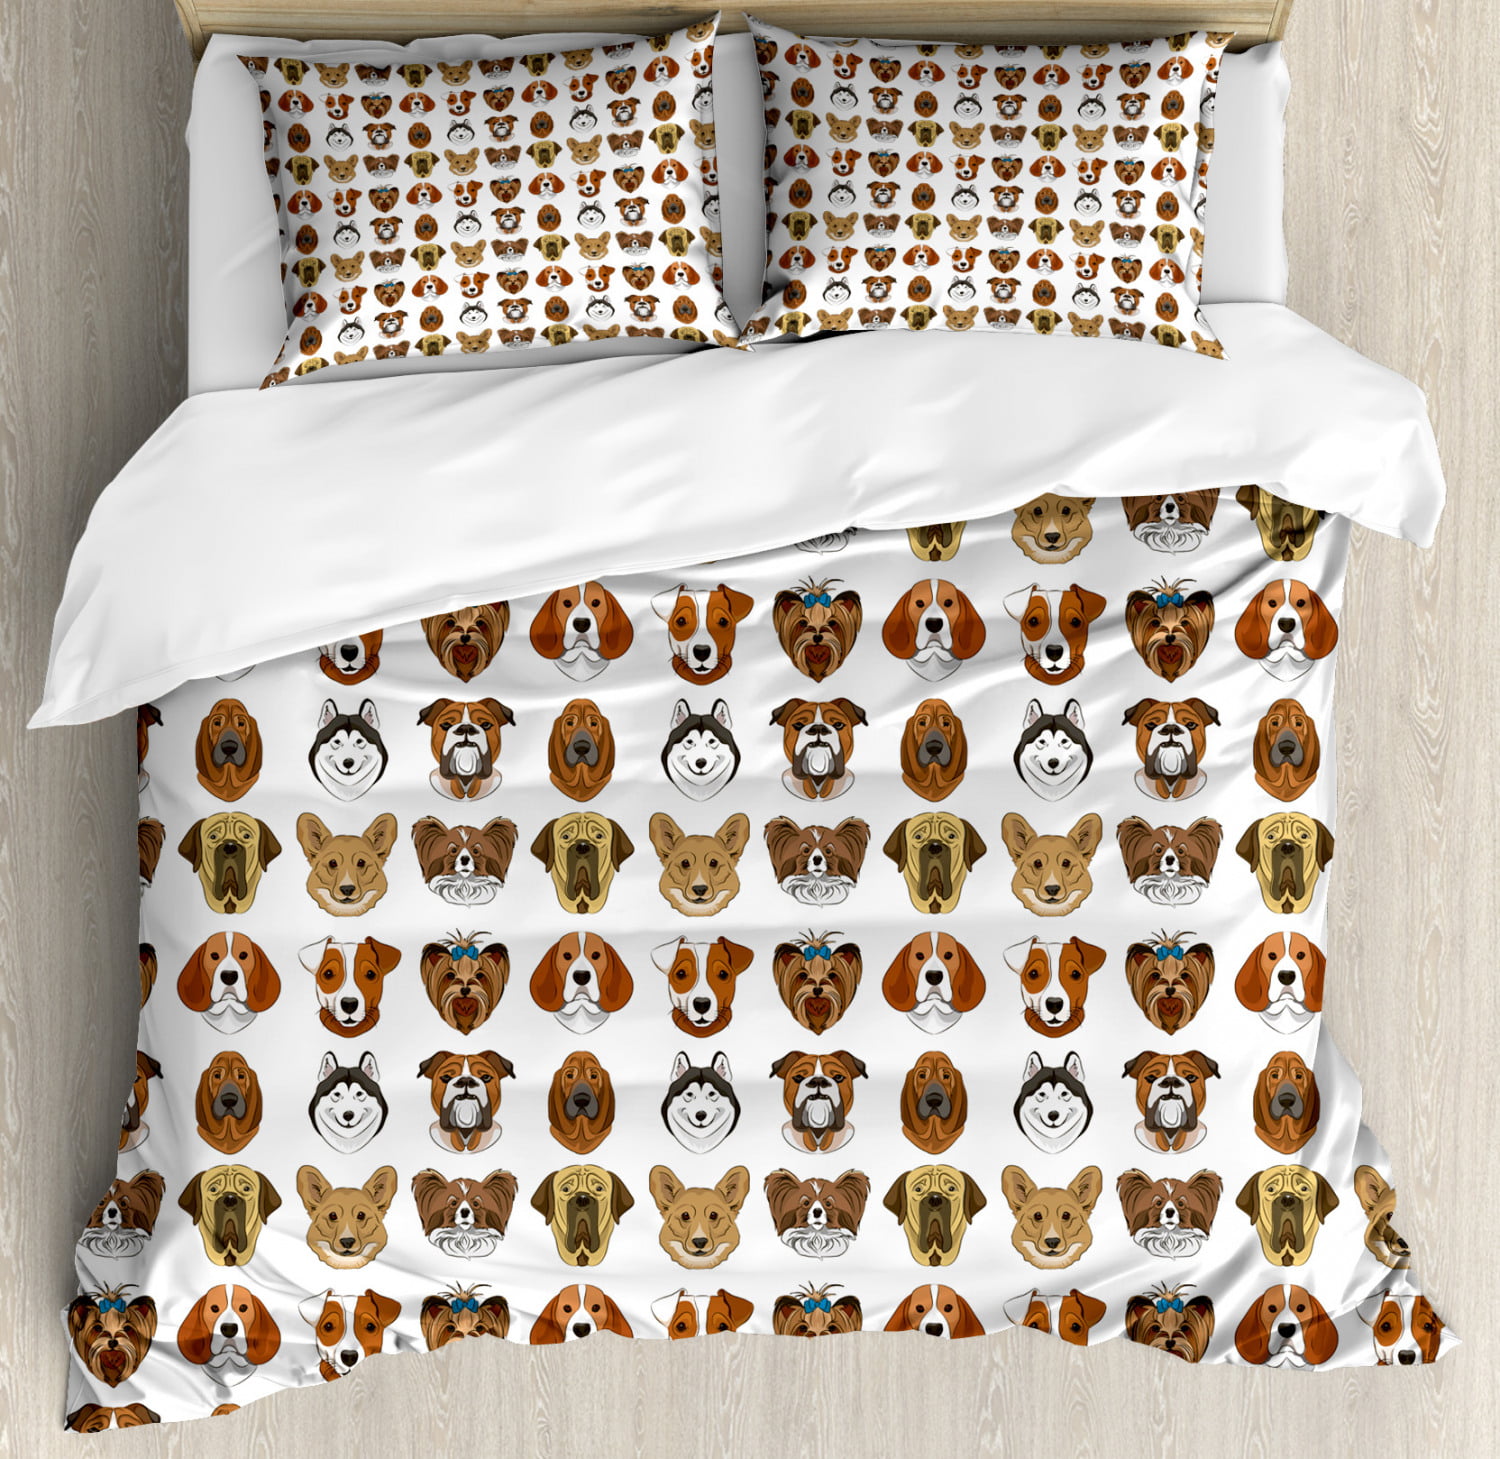 Dogs Duvet Cover Set King Size Portraits Of Dogs With Comical